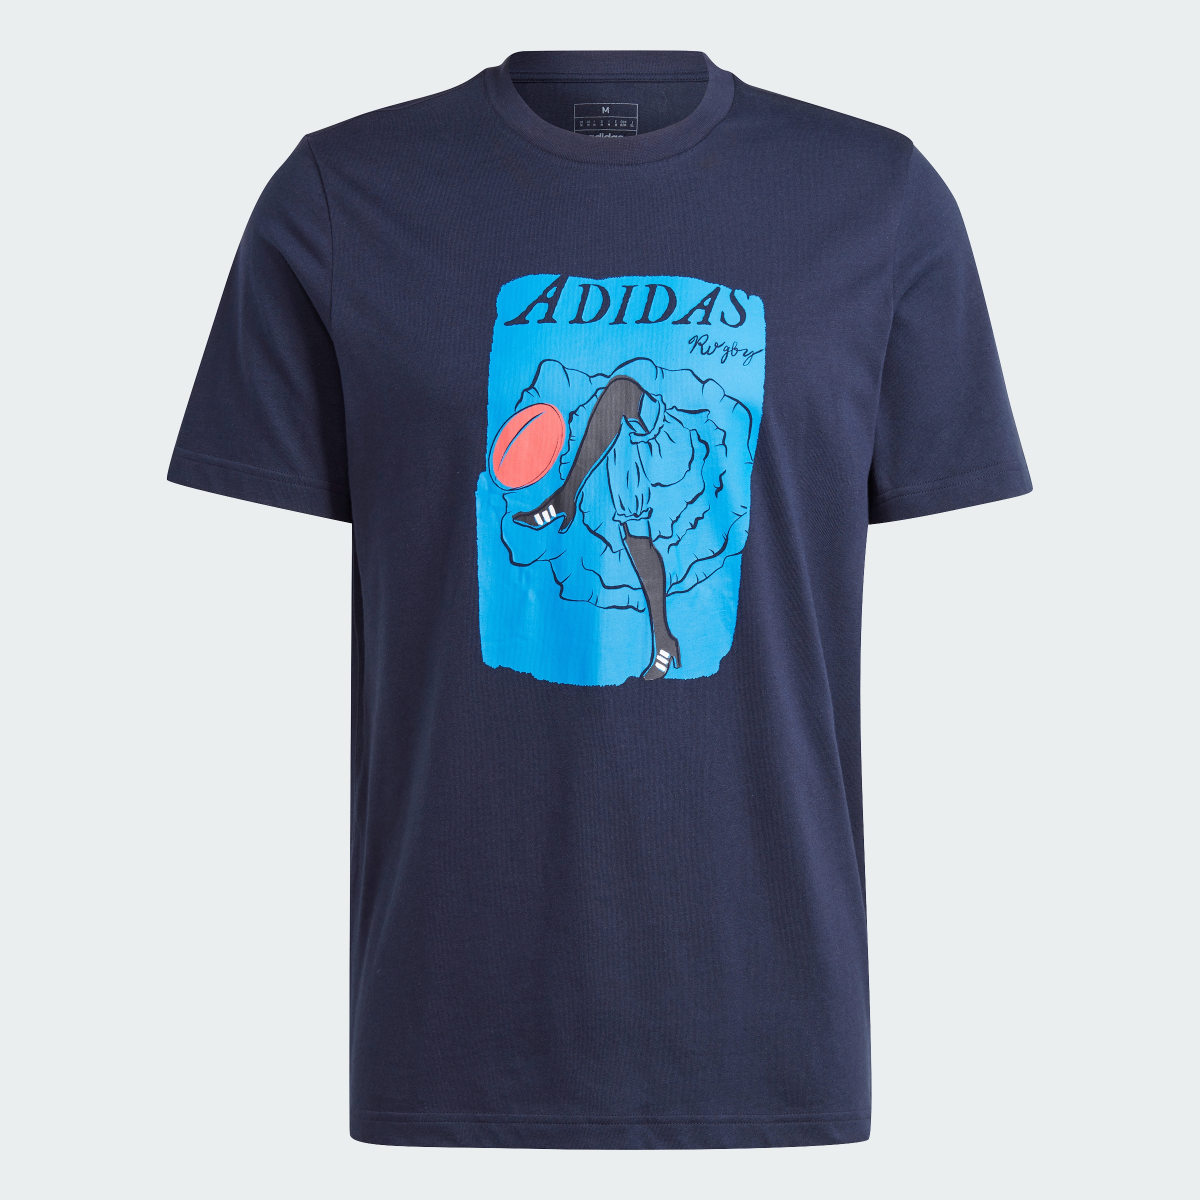 Adidas T-shirt graphique Rugby Cancan. 5